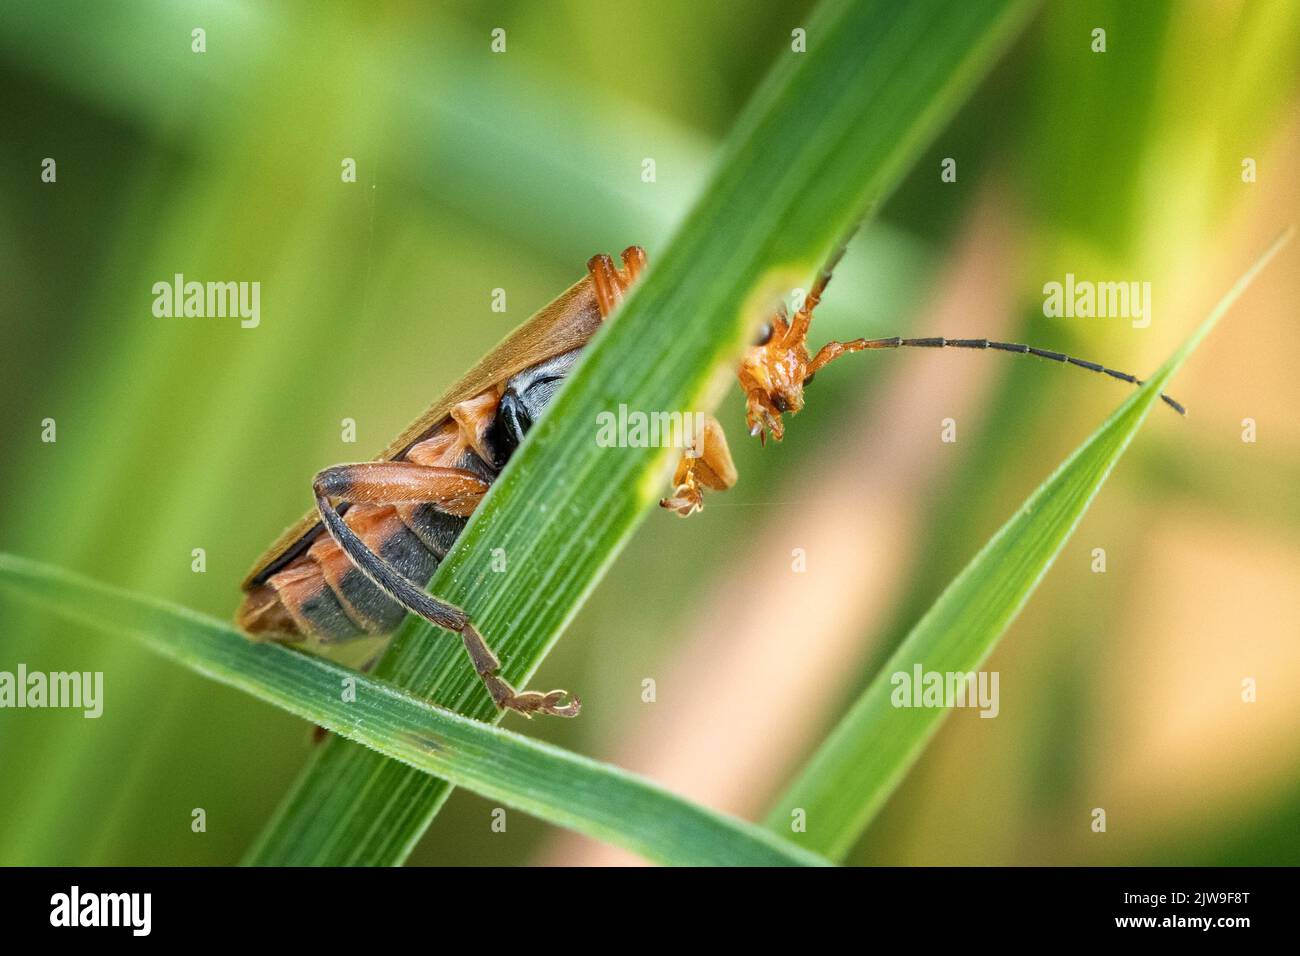 Common soldier beetle Cantharis livida (pale form) peeping out from behind a leaf appearing nervous. UK Stock Photo